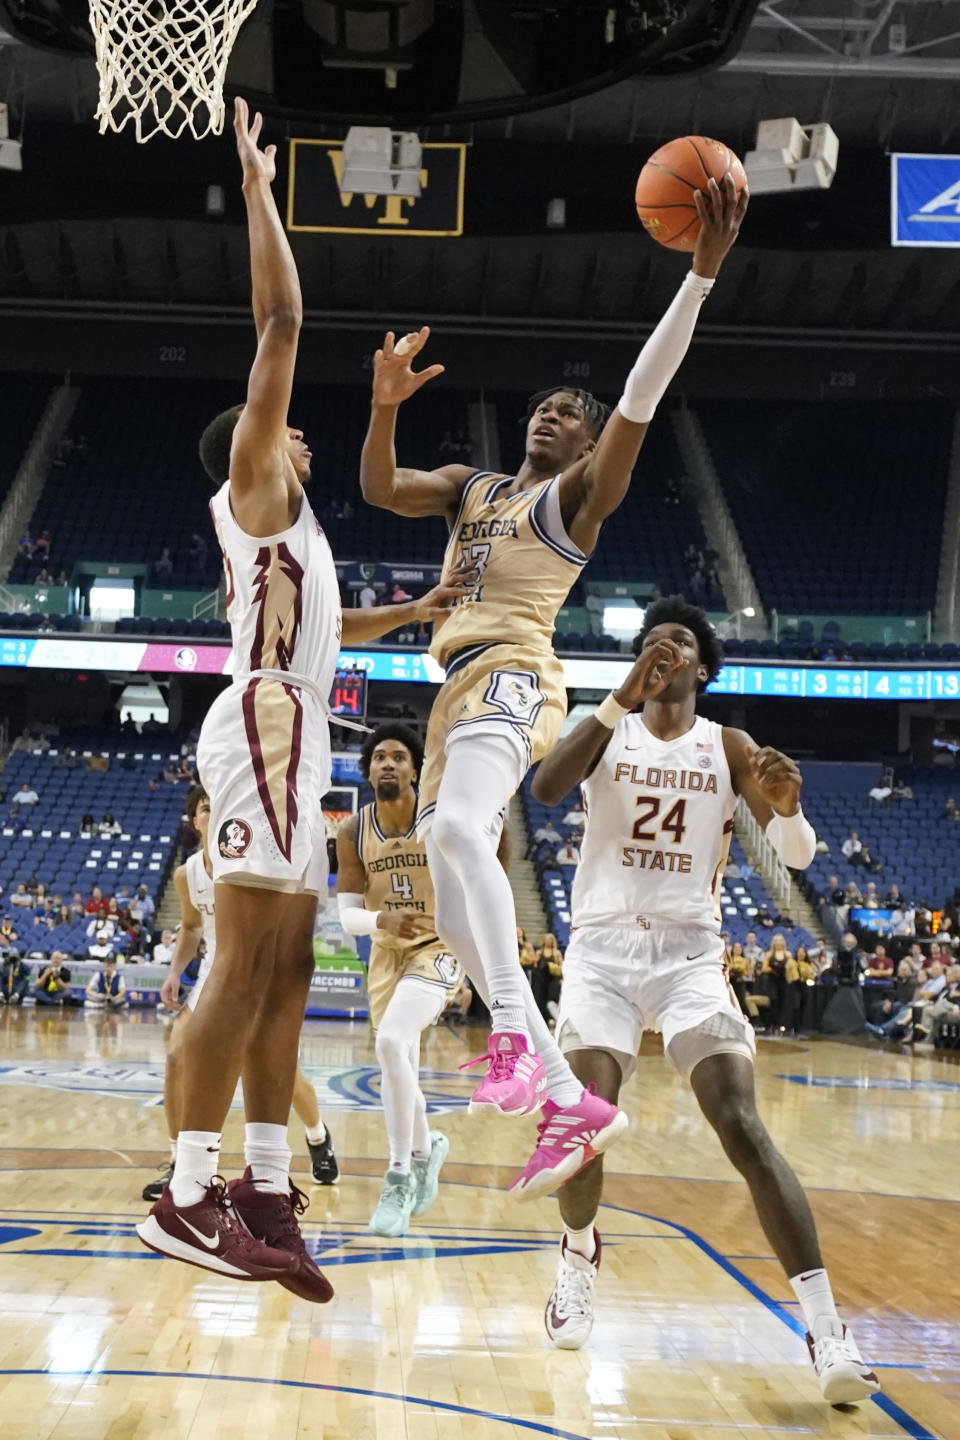 FILE - Georgia Tech guard Miles Kelly (13) drives past Florida State center Naheem McLeod (24) and Chandler Jackson (0) during the second half of an NCAA college basketball game at the Atlantic Coast Conference Tournament in Greensboro, N.C., Tuesday, March 7, 2023. Kelly was the top scorer last season at 14.4 points per game. (AP Photo/Chuck Burton, File)